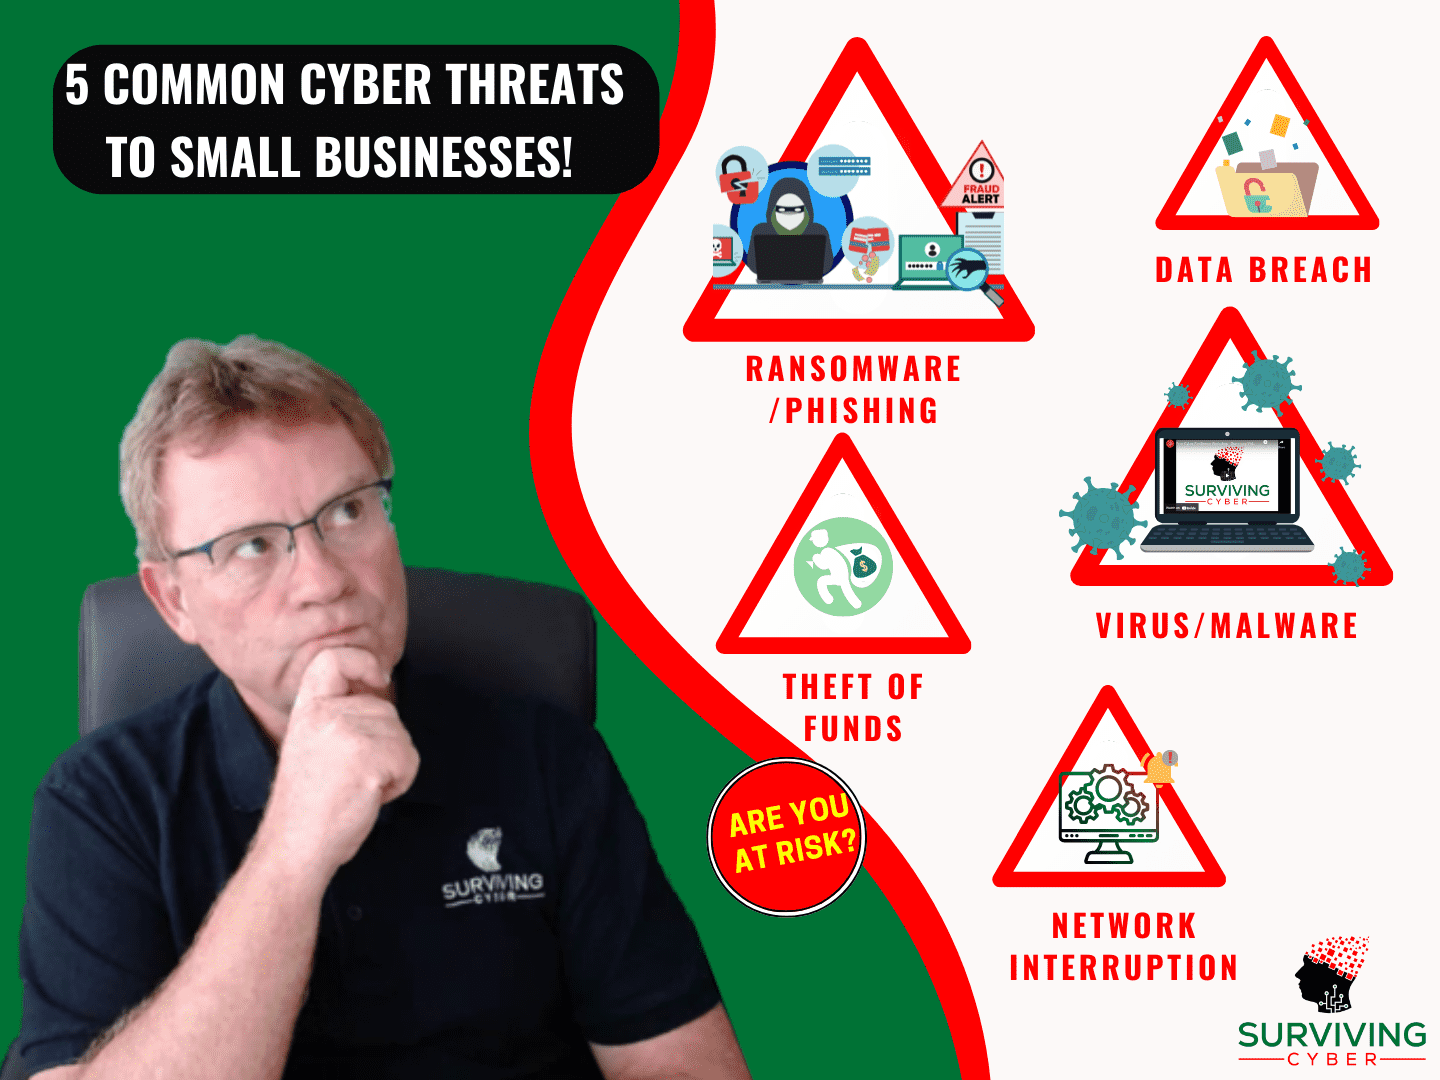 5 Common Cyber Threats to Small Businesses